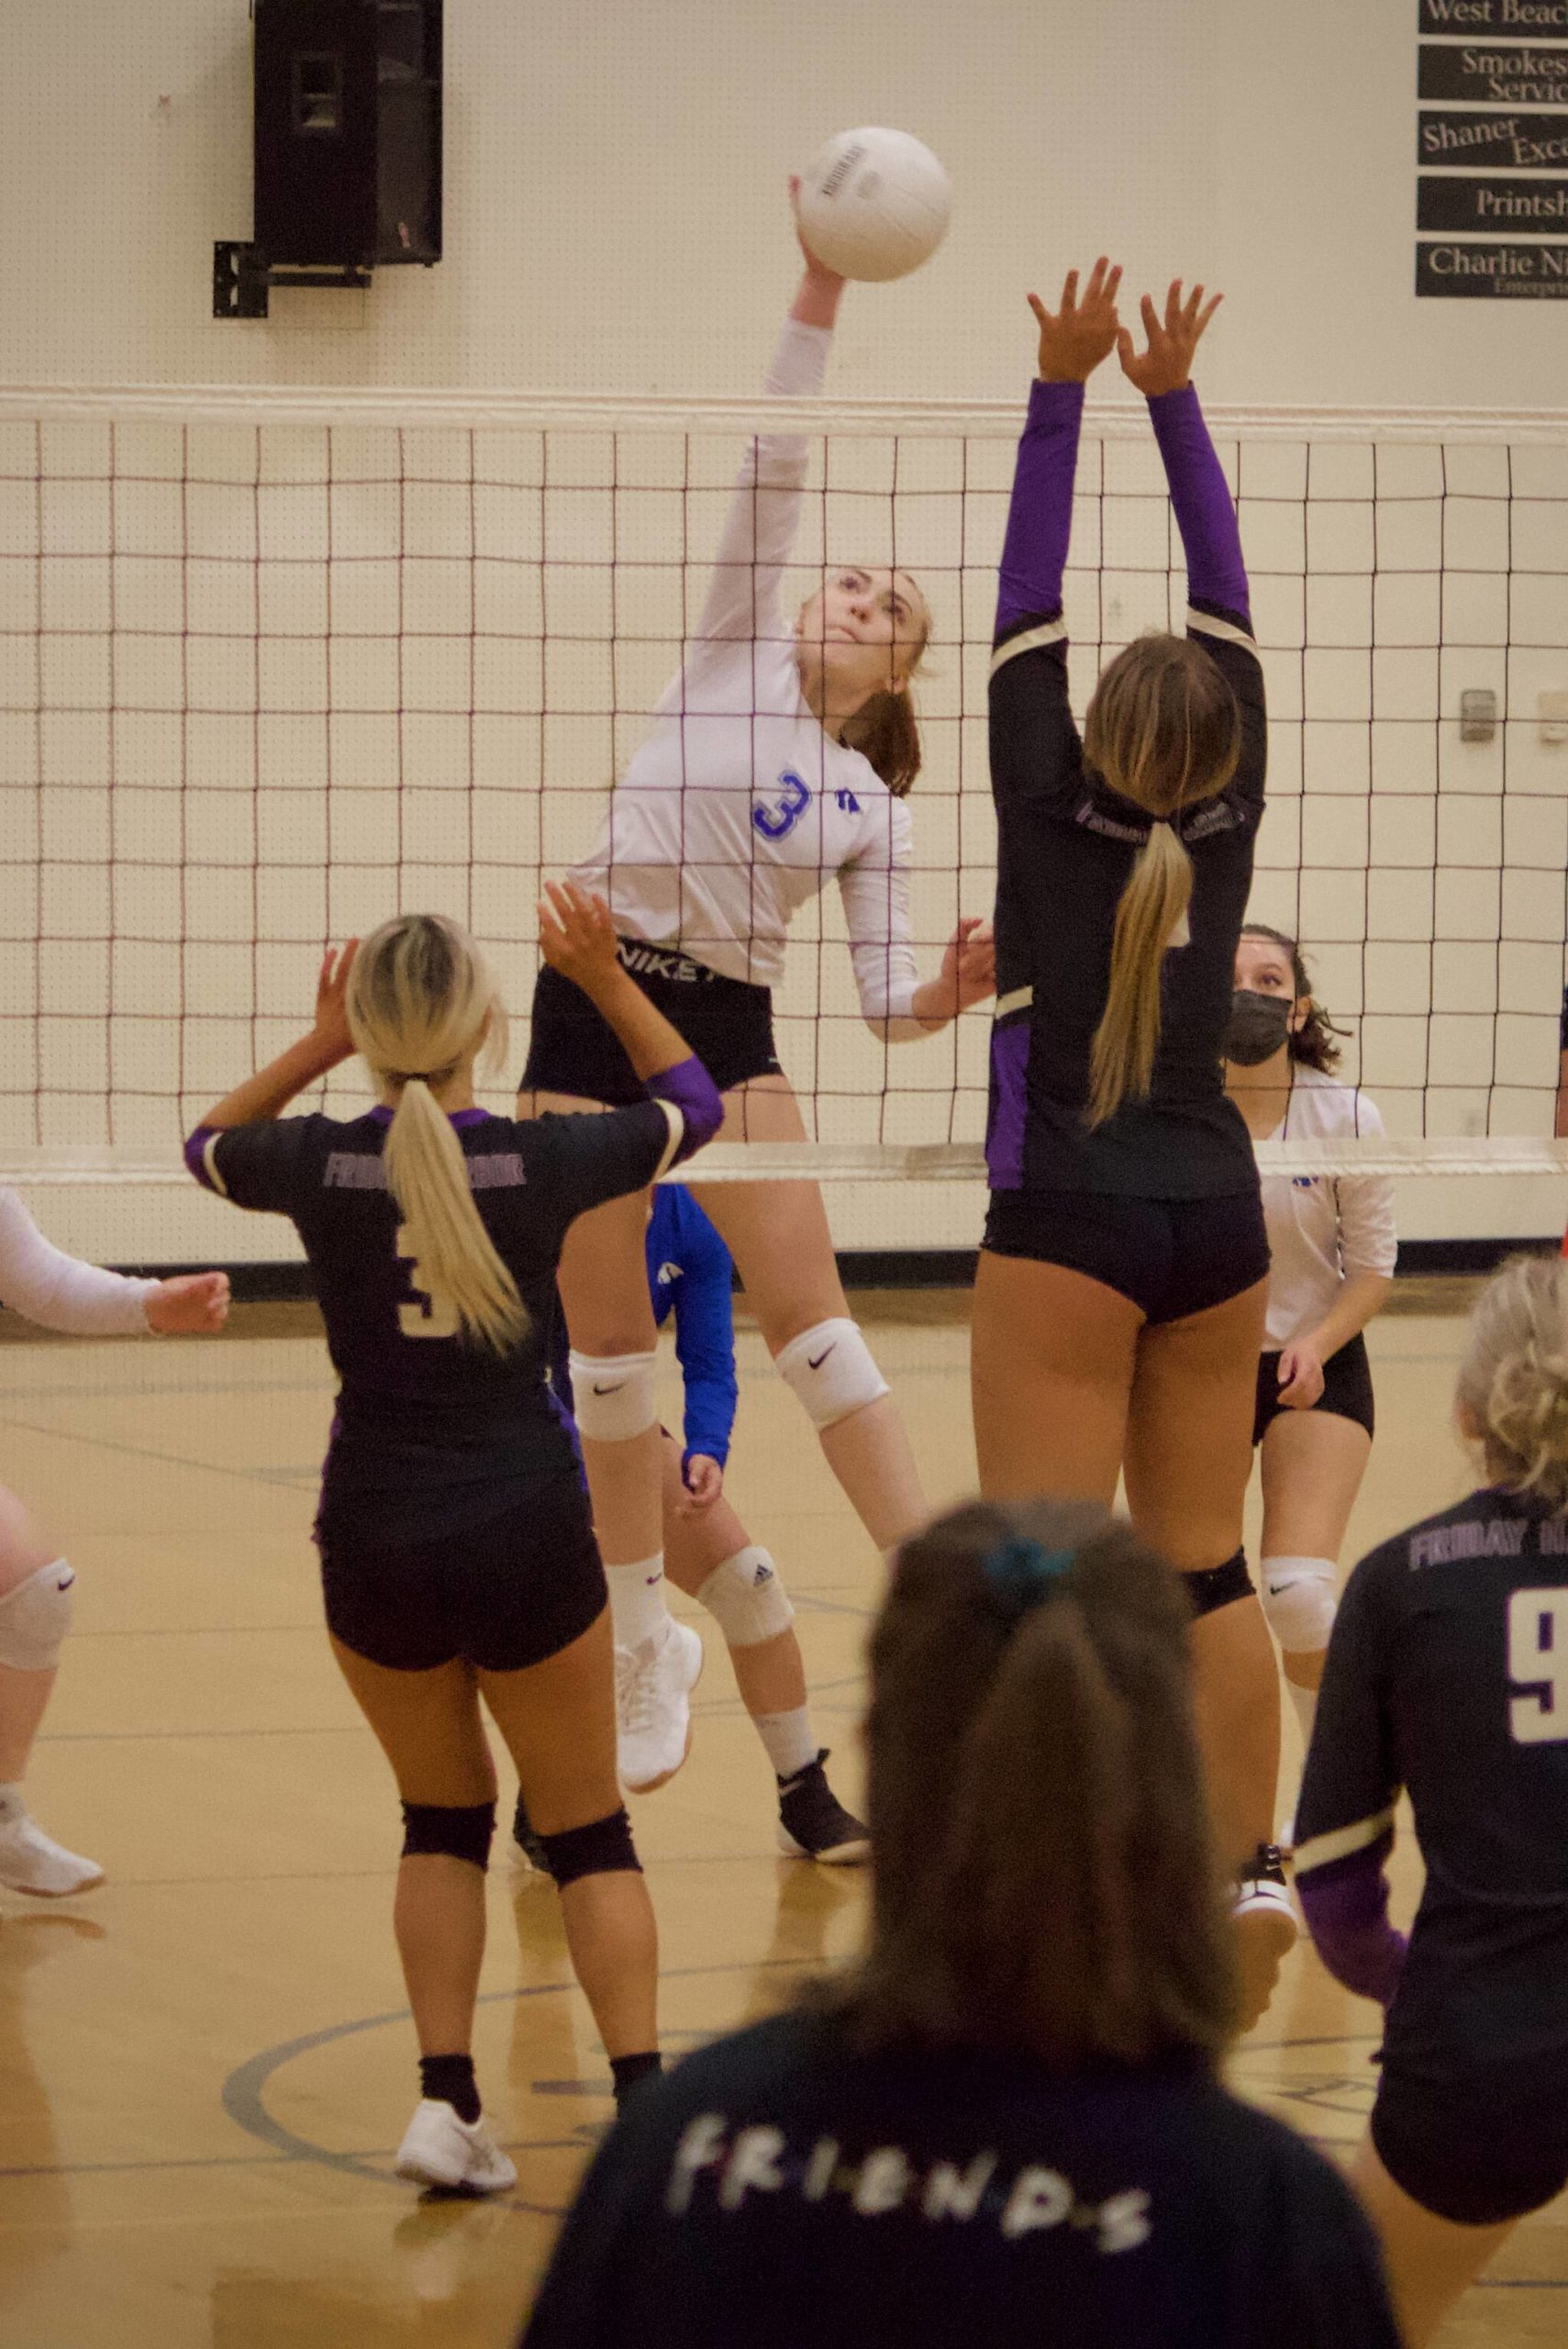 Corey Wiscomb photo
Senior Alecia Talbott really upped her game this week, becoming a solid presence at the net and supporting her team with consistent hitting. She is pictured here with a kill against Friday Harbor.